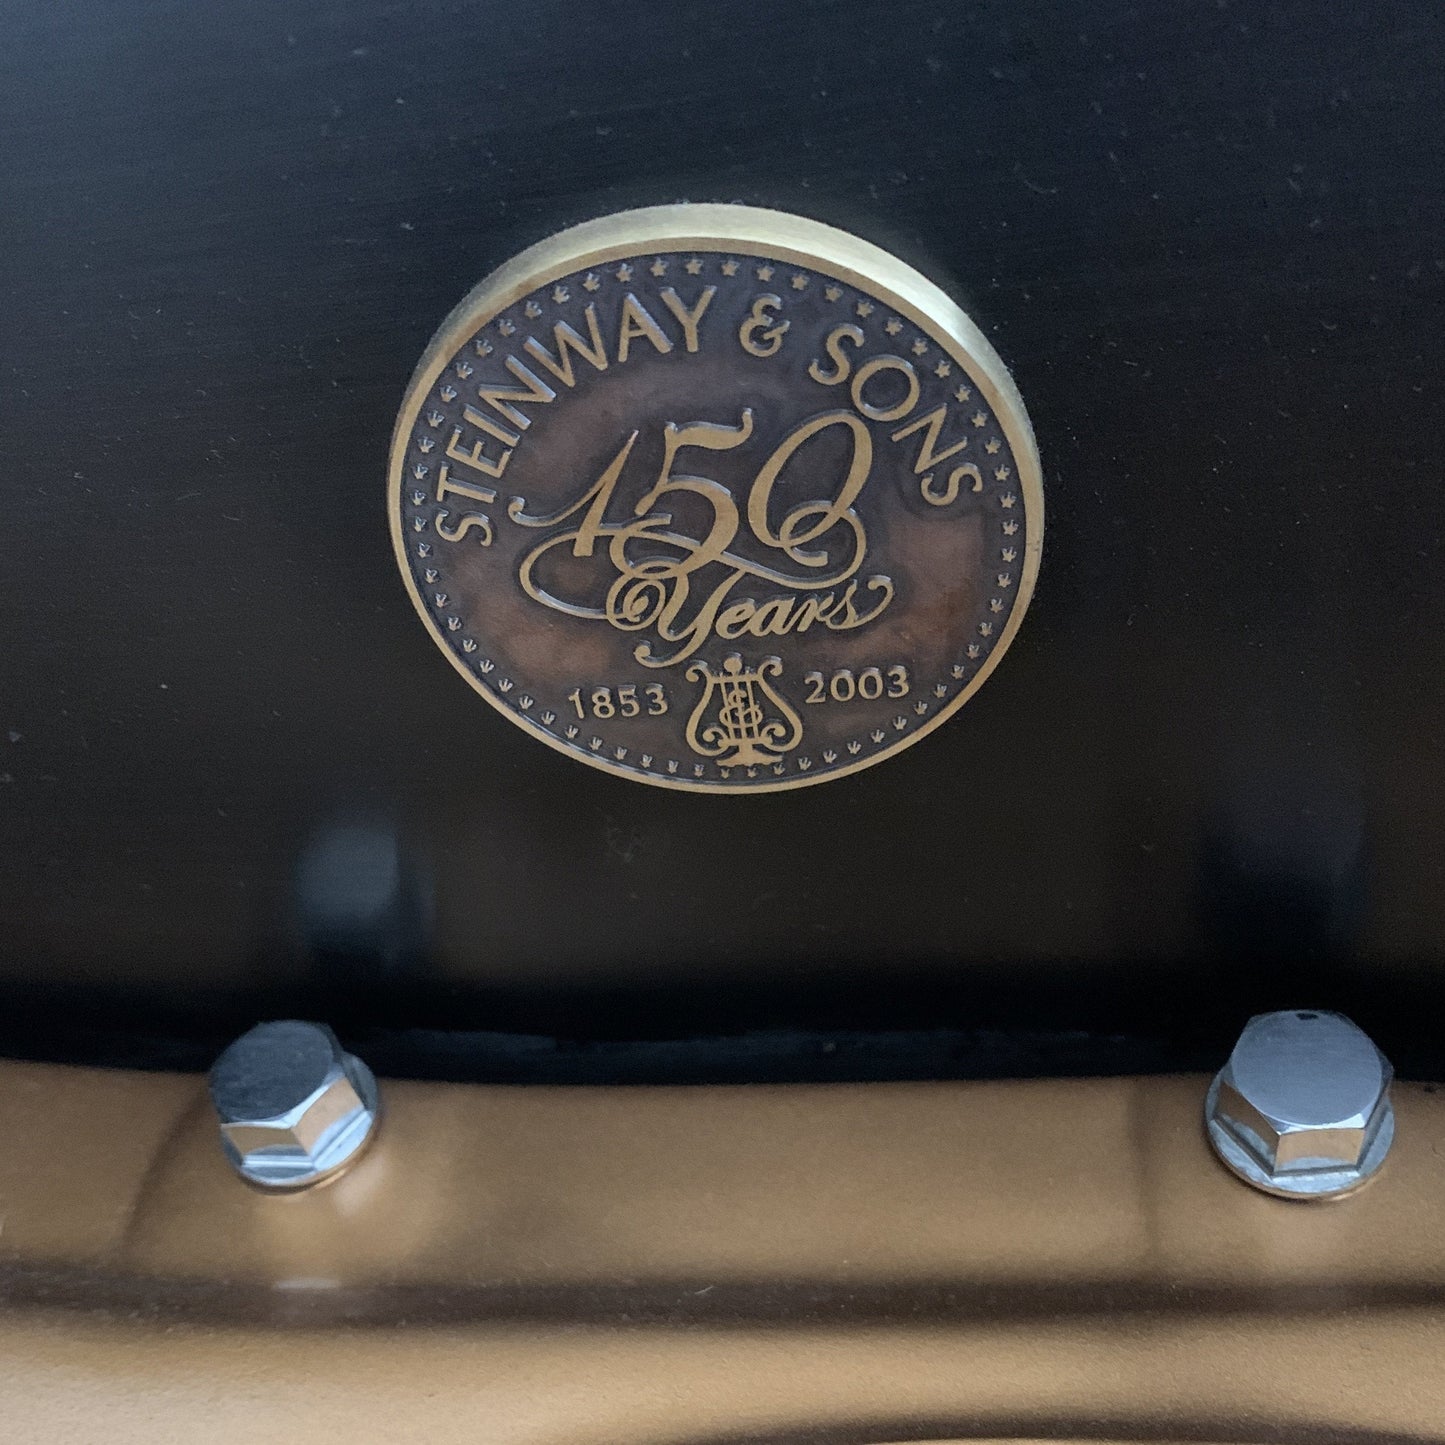 Used Steinway Model B Piano Anniversary Edition 2003, Purchased New in 2004